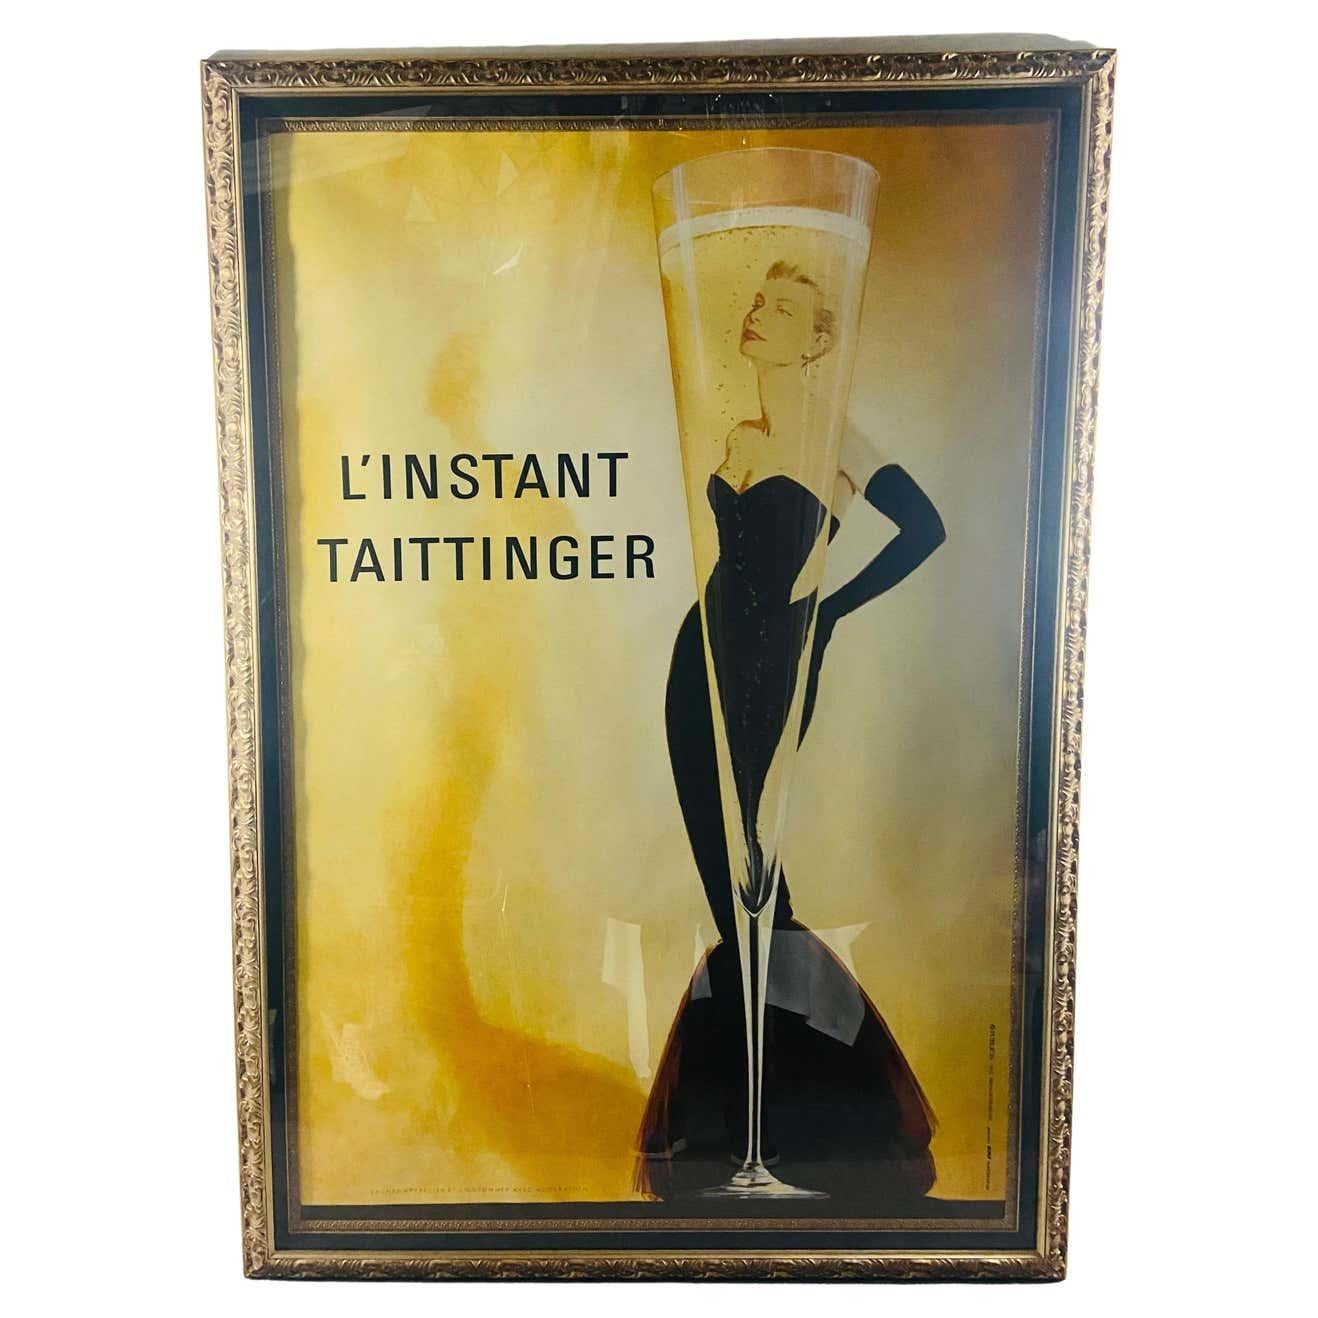 A large and impressive L'Instant Taittinger authentic vintage poster by Publicic Conseil The L’Instant Taittinger. Printed in 1989, Taittinger advertisers were aiming for a 1940s glamour Hollywood feel when they designed an initial mock-up of a